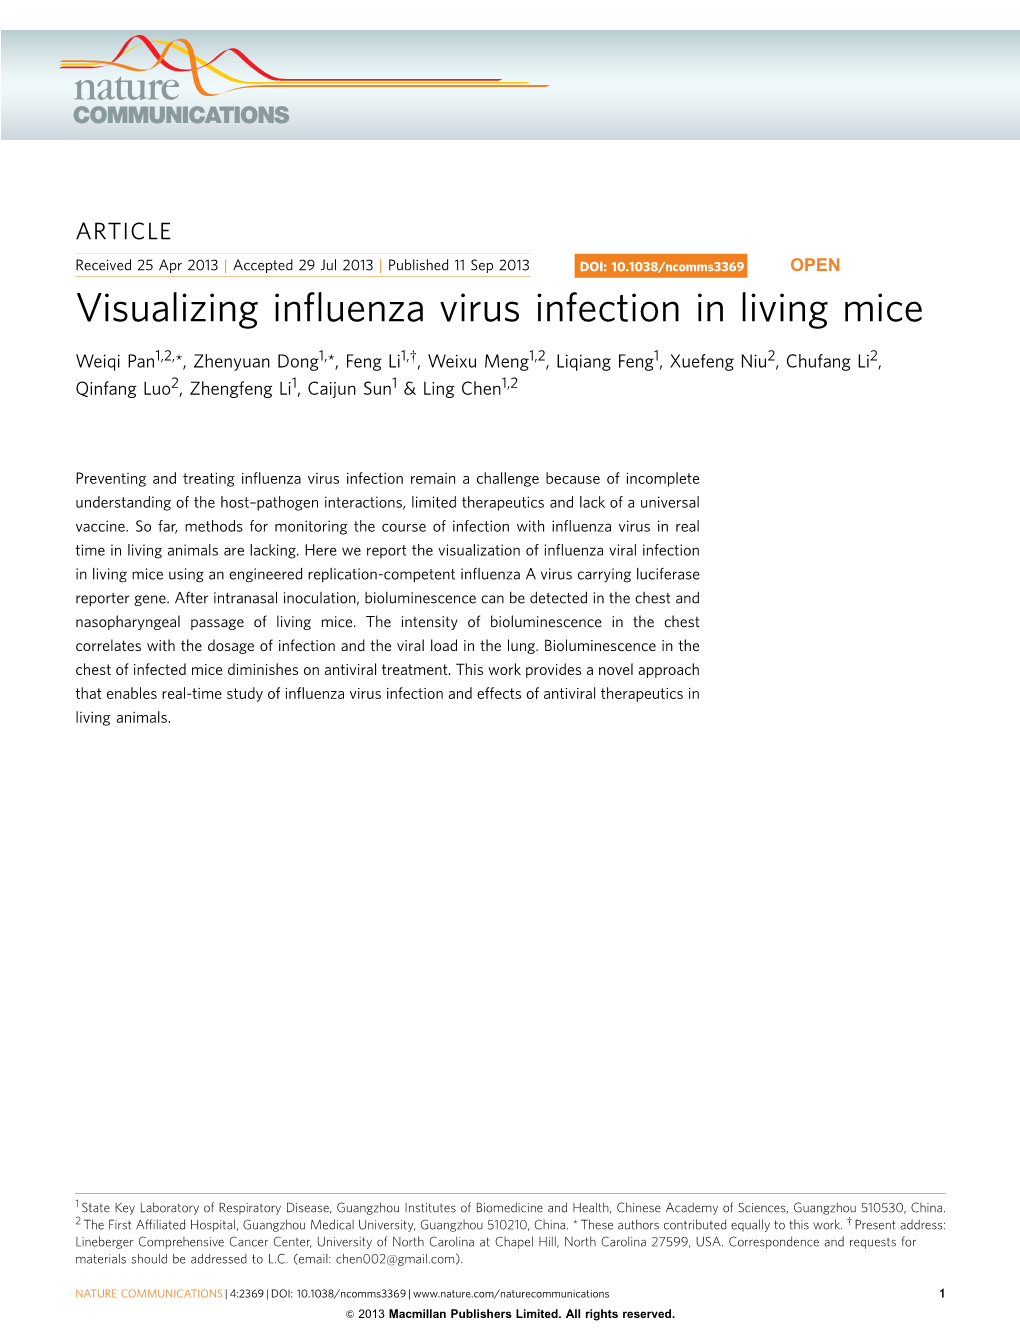 Visualizing Influenza Virus Infection in Living Mice